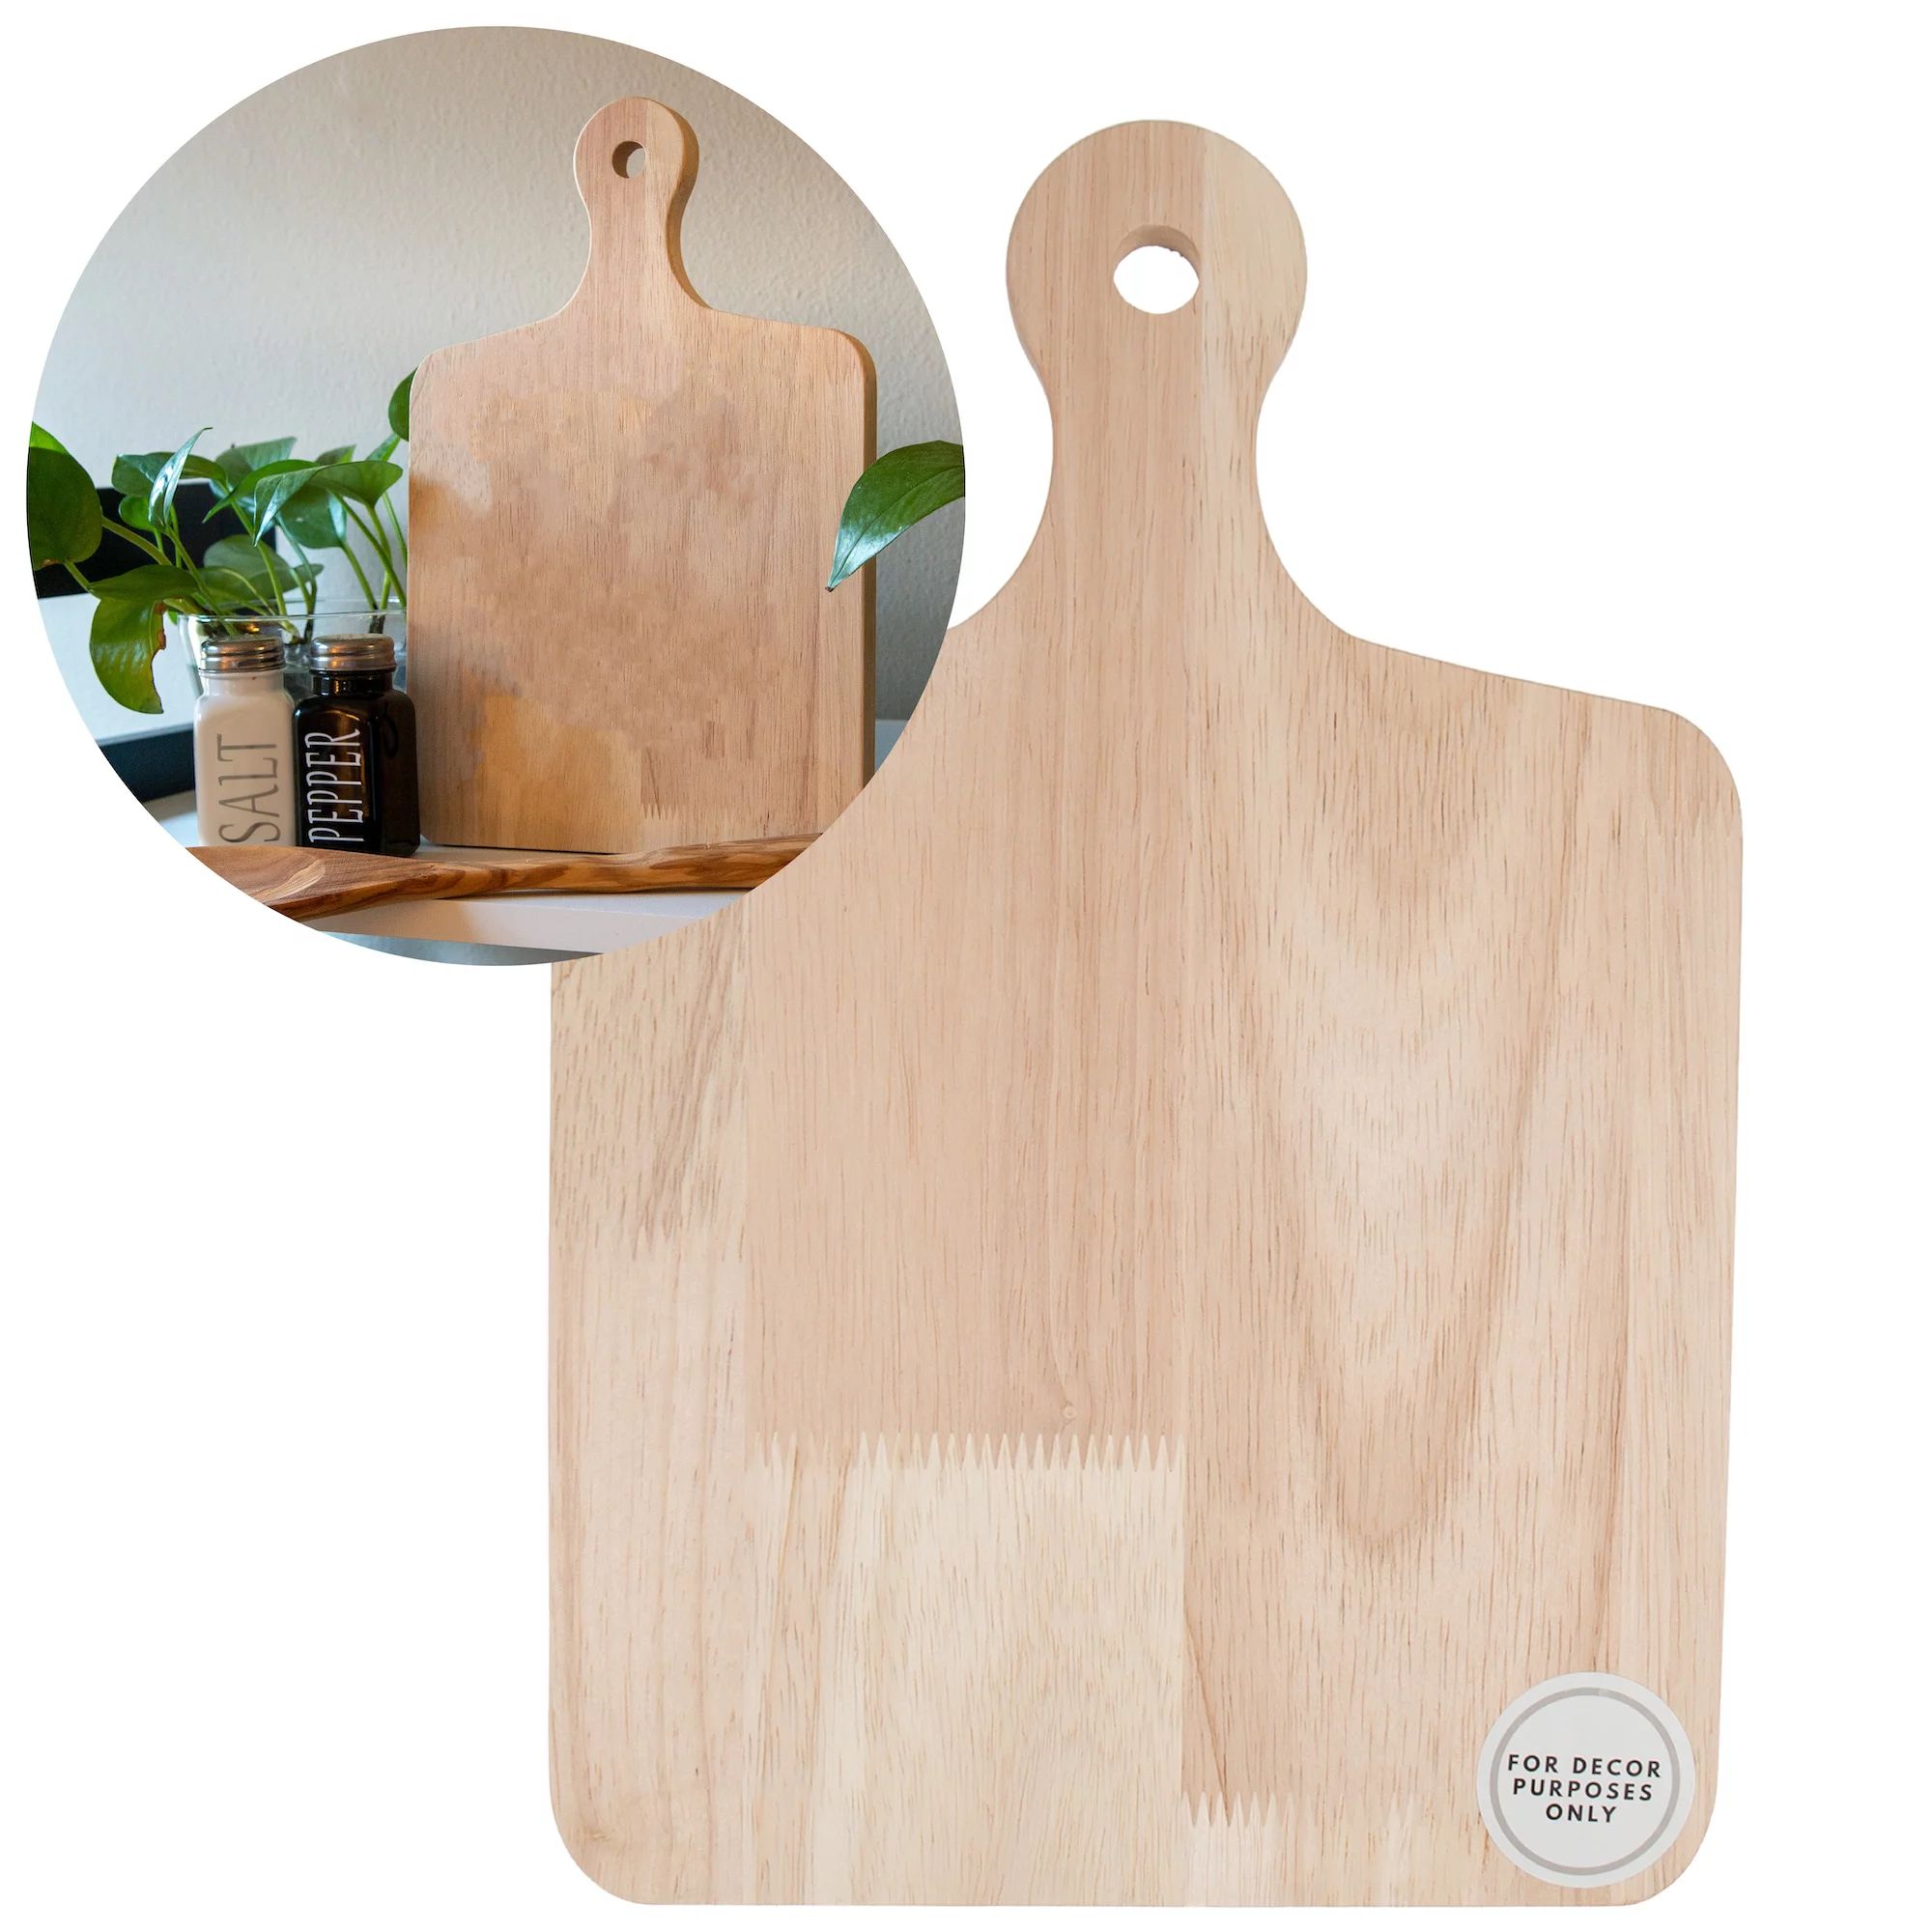 On The Surface Decorative Square Tray, Customizable Wooden Serving Tray With Handles: | Walmart (US)